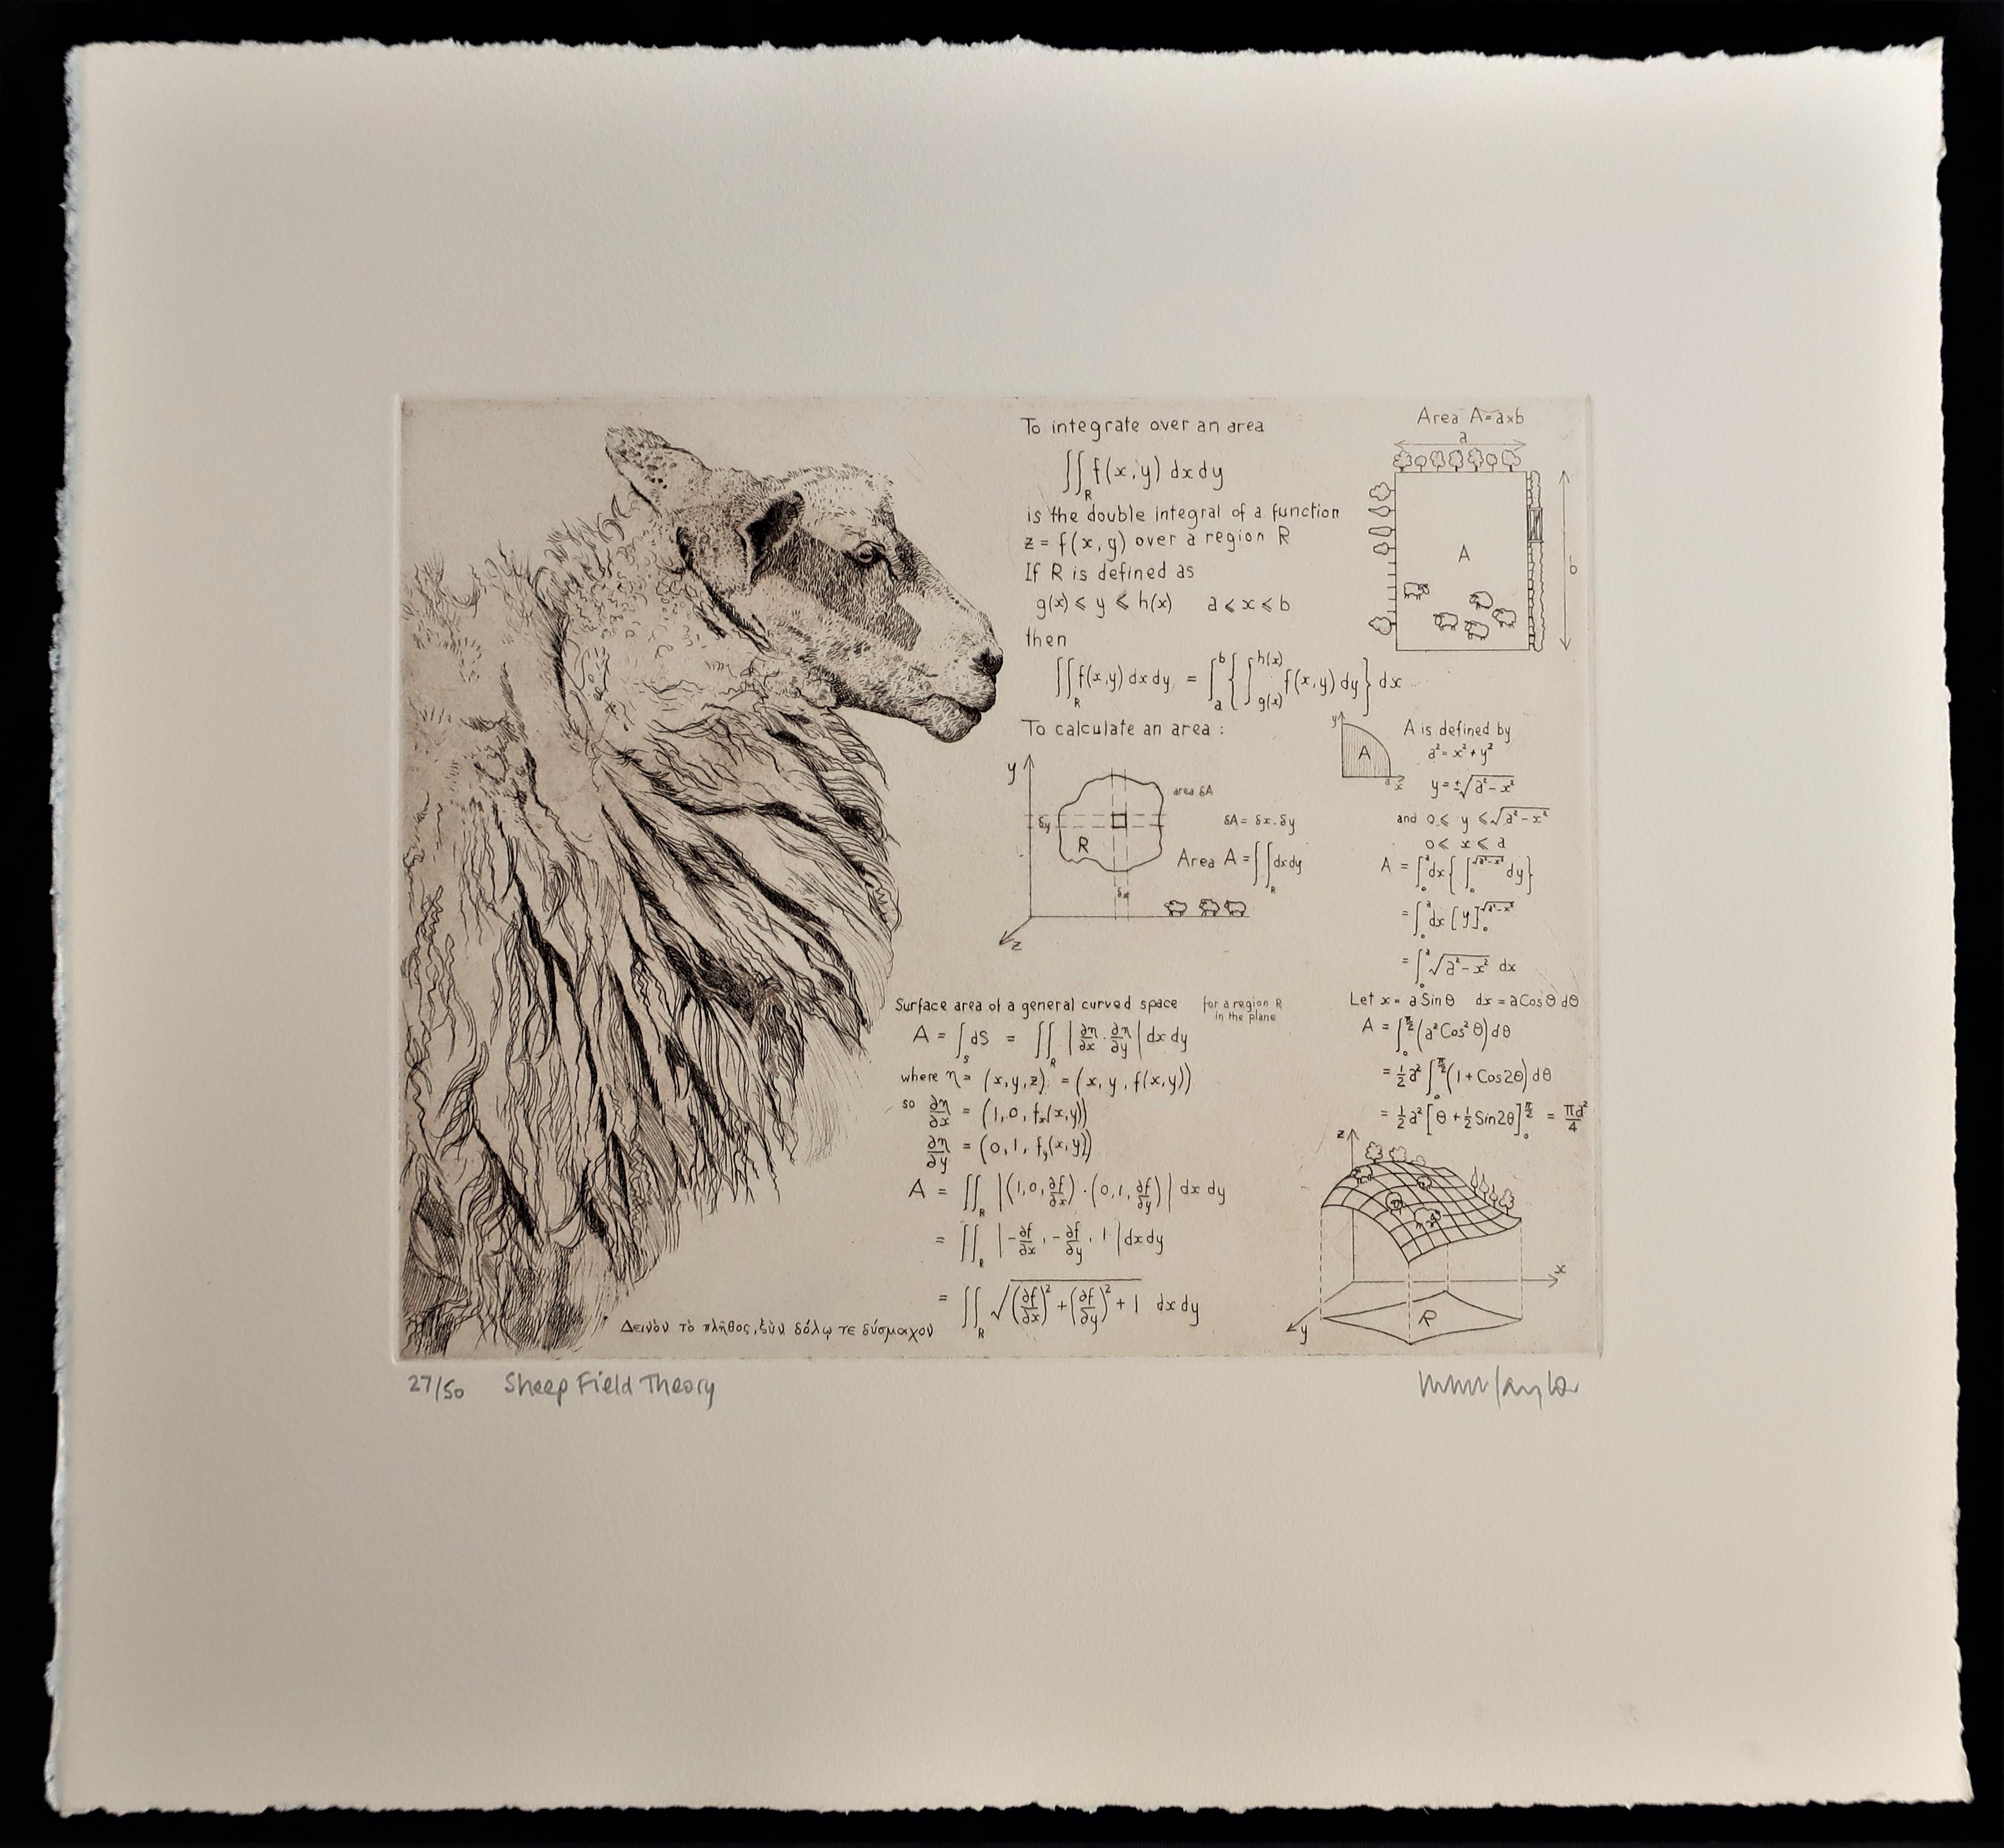 Will Taylor 
Sheep Field Theory
Original limited edition of 50 – printed by the artist on Somerset 300gsm Cotton paper
Copper-plate etching
Image size W 25 cm x H 20 cm
Sheet size W 39 cm x H 36 cm
Sold unframed
Free Shipping
Please note that in